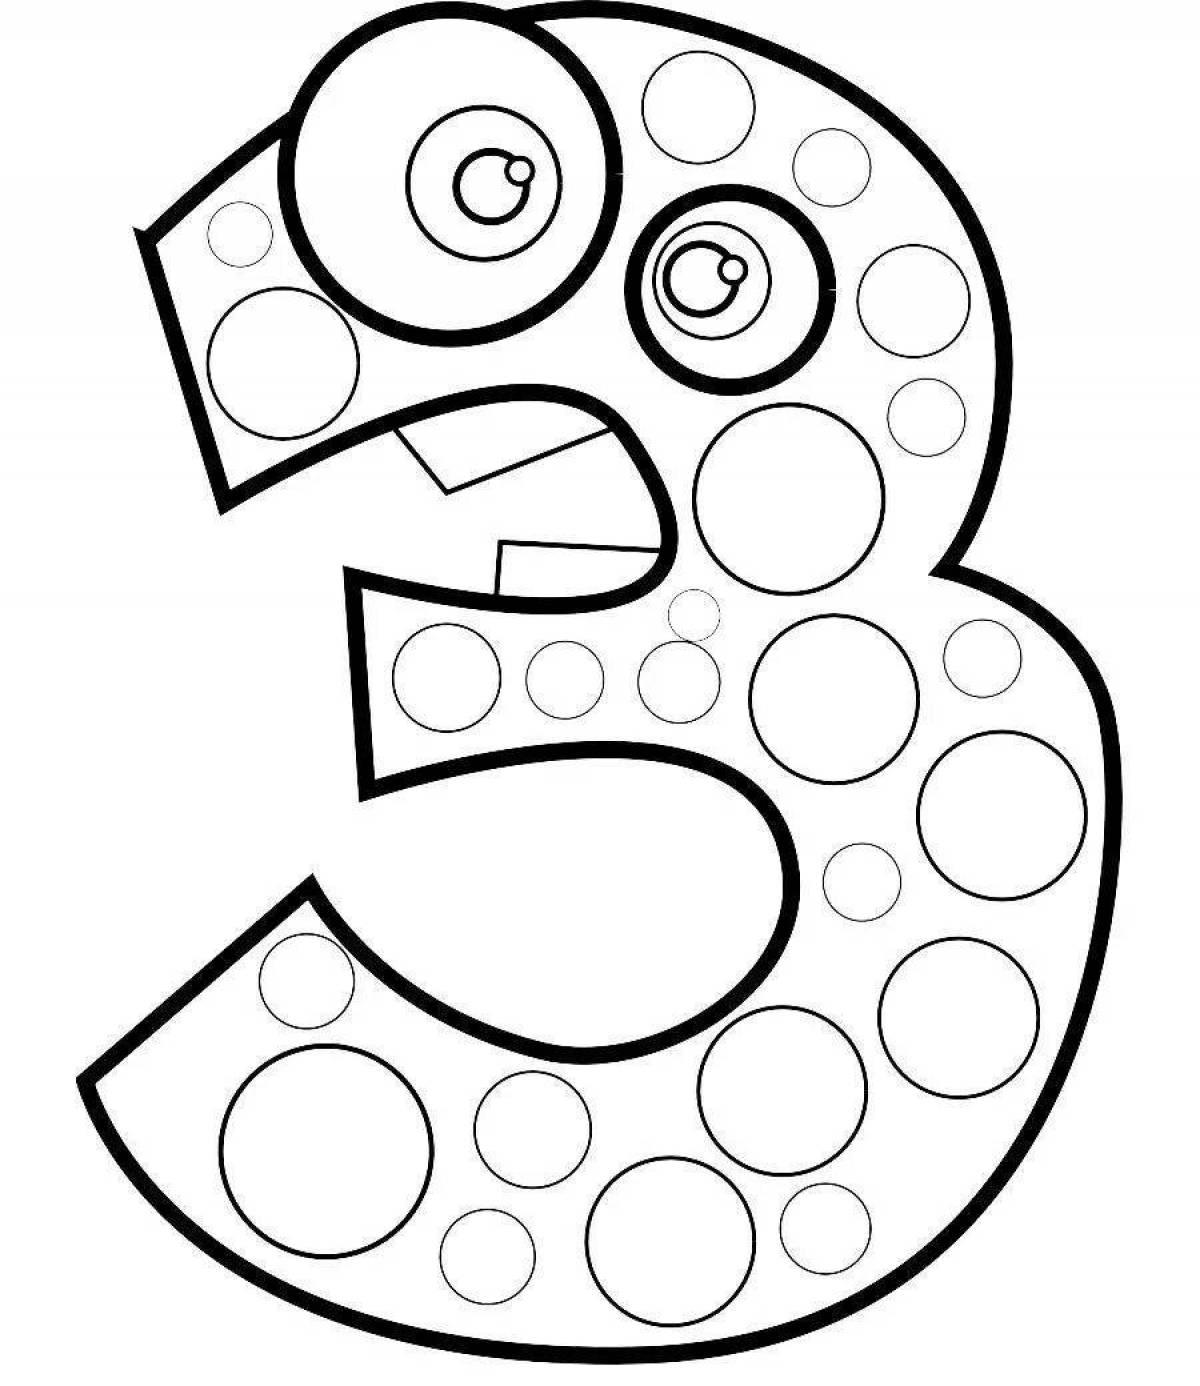 Unique number three coloring page